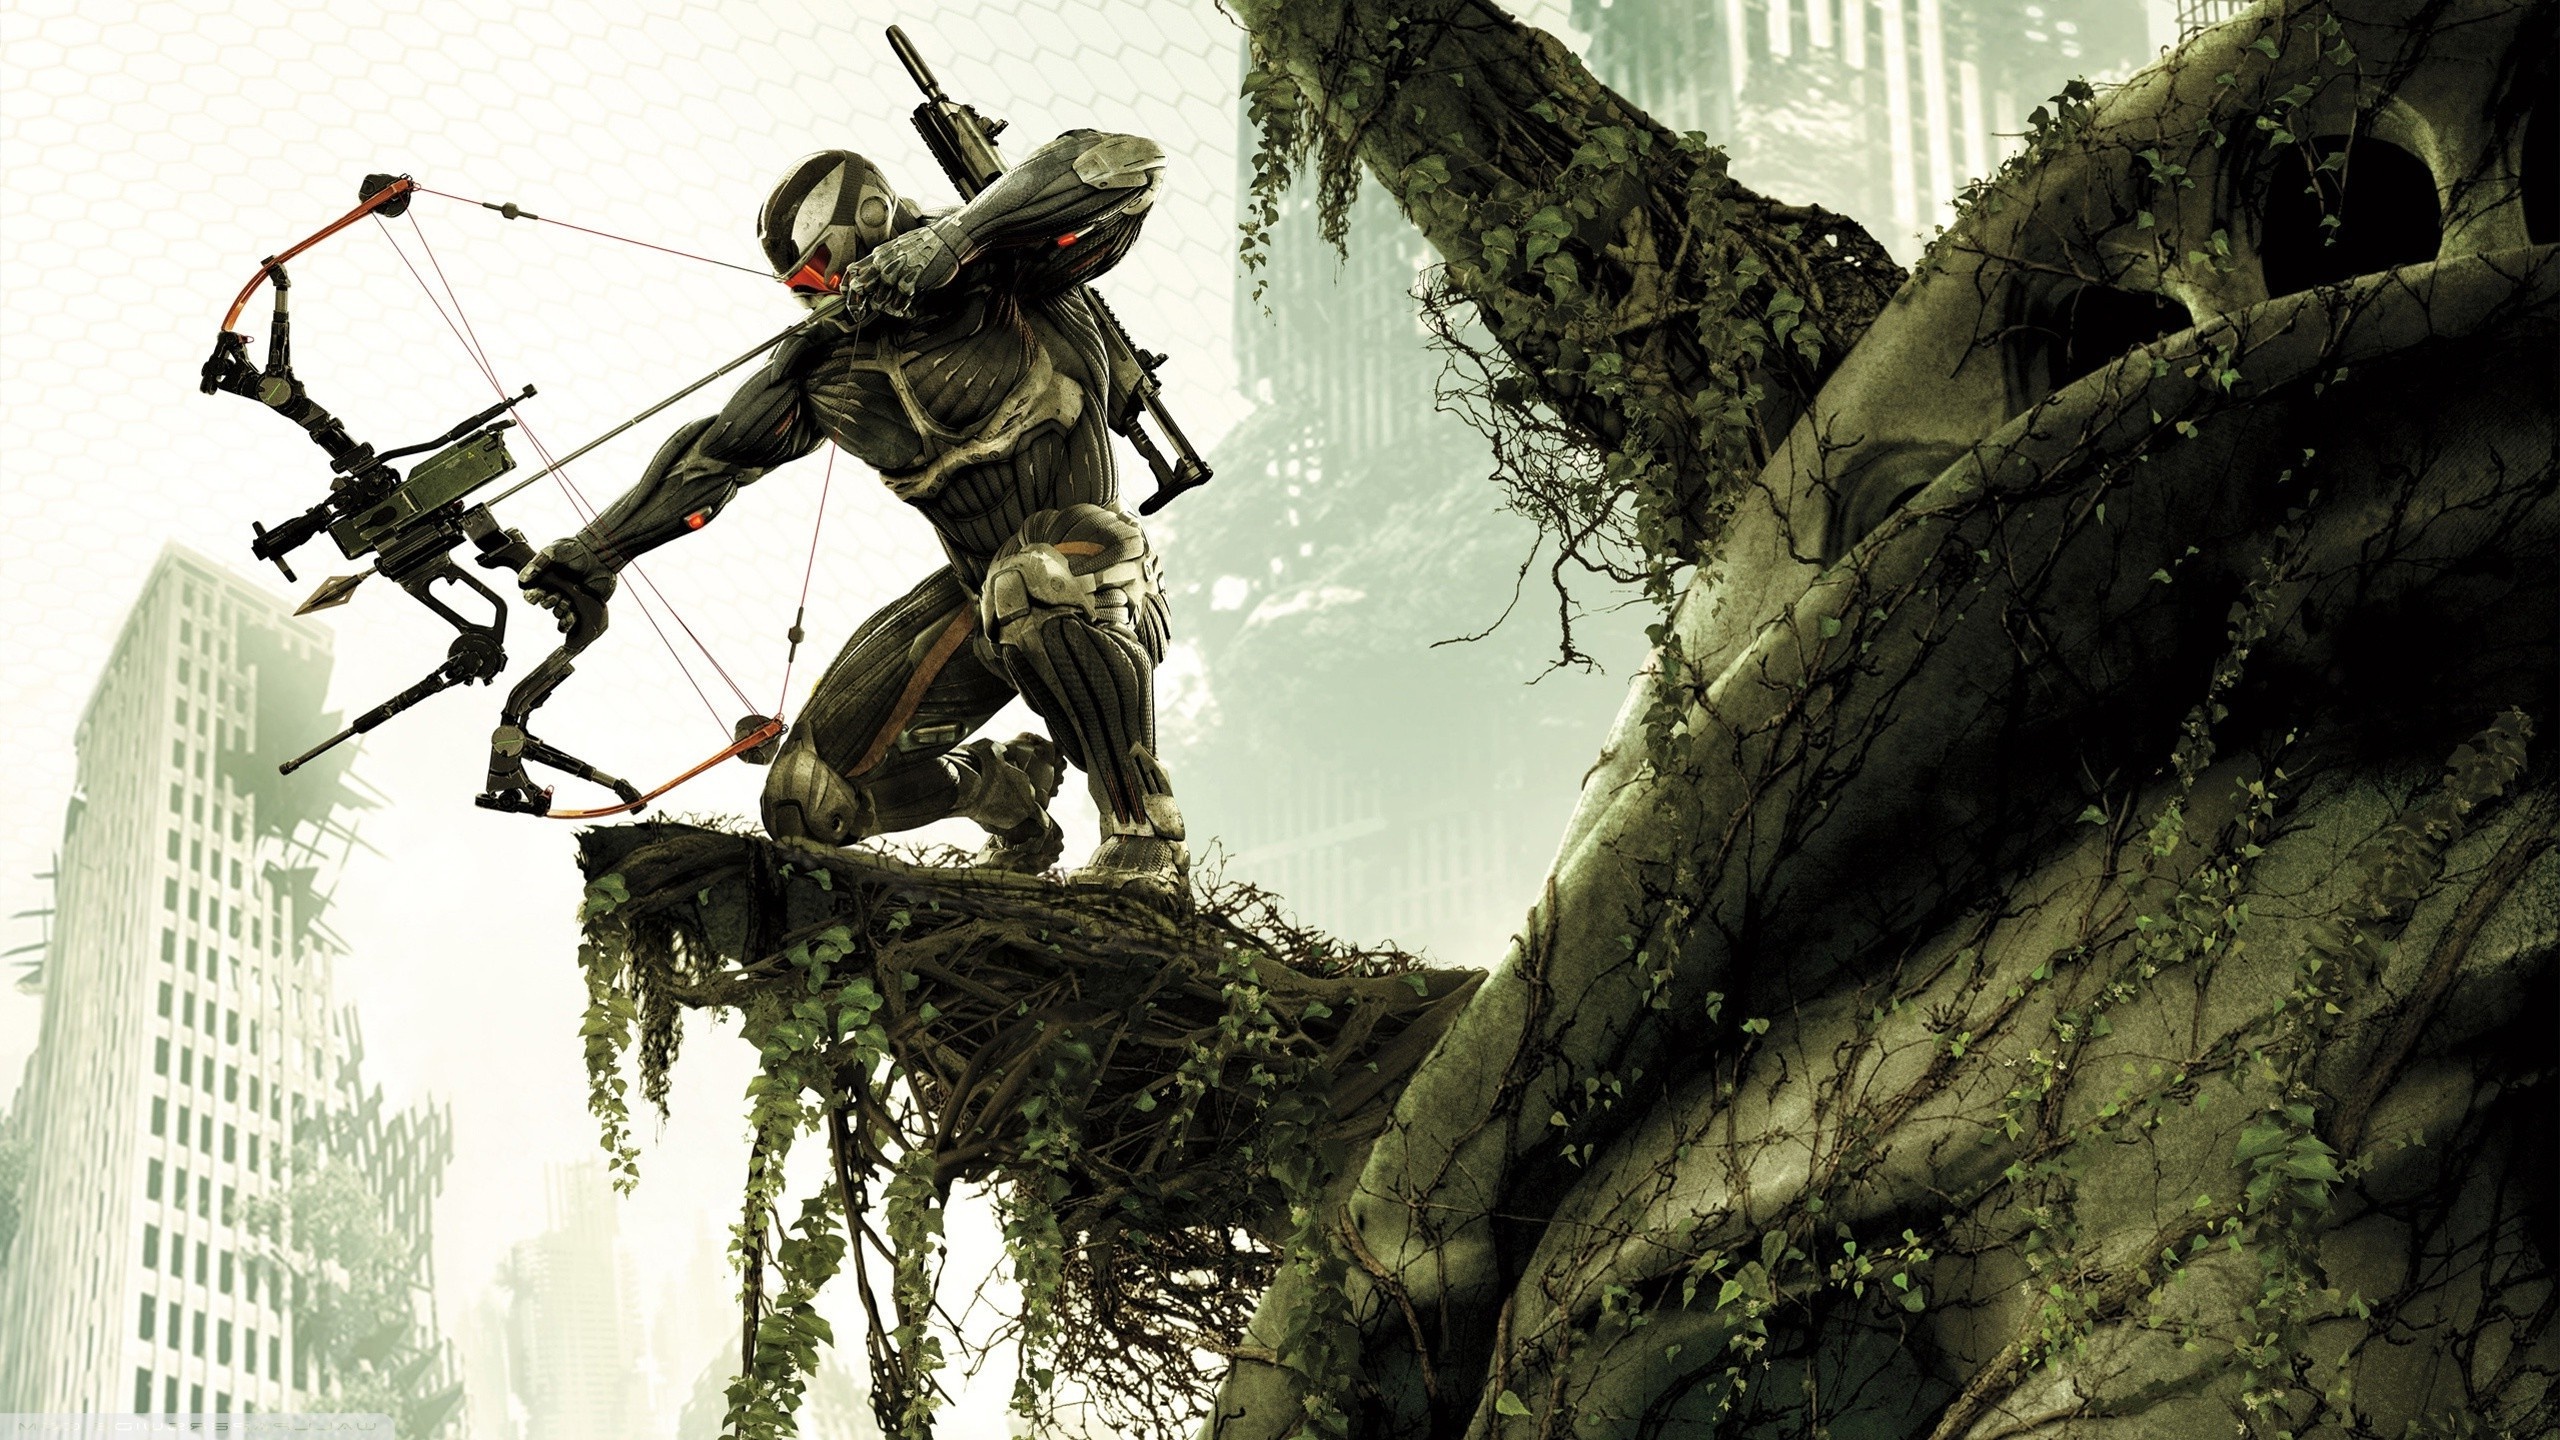 Crysis, Video game series, Crysis 3, First person shooter, 2560x1440 HD Desktop